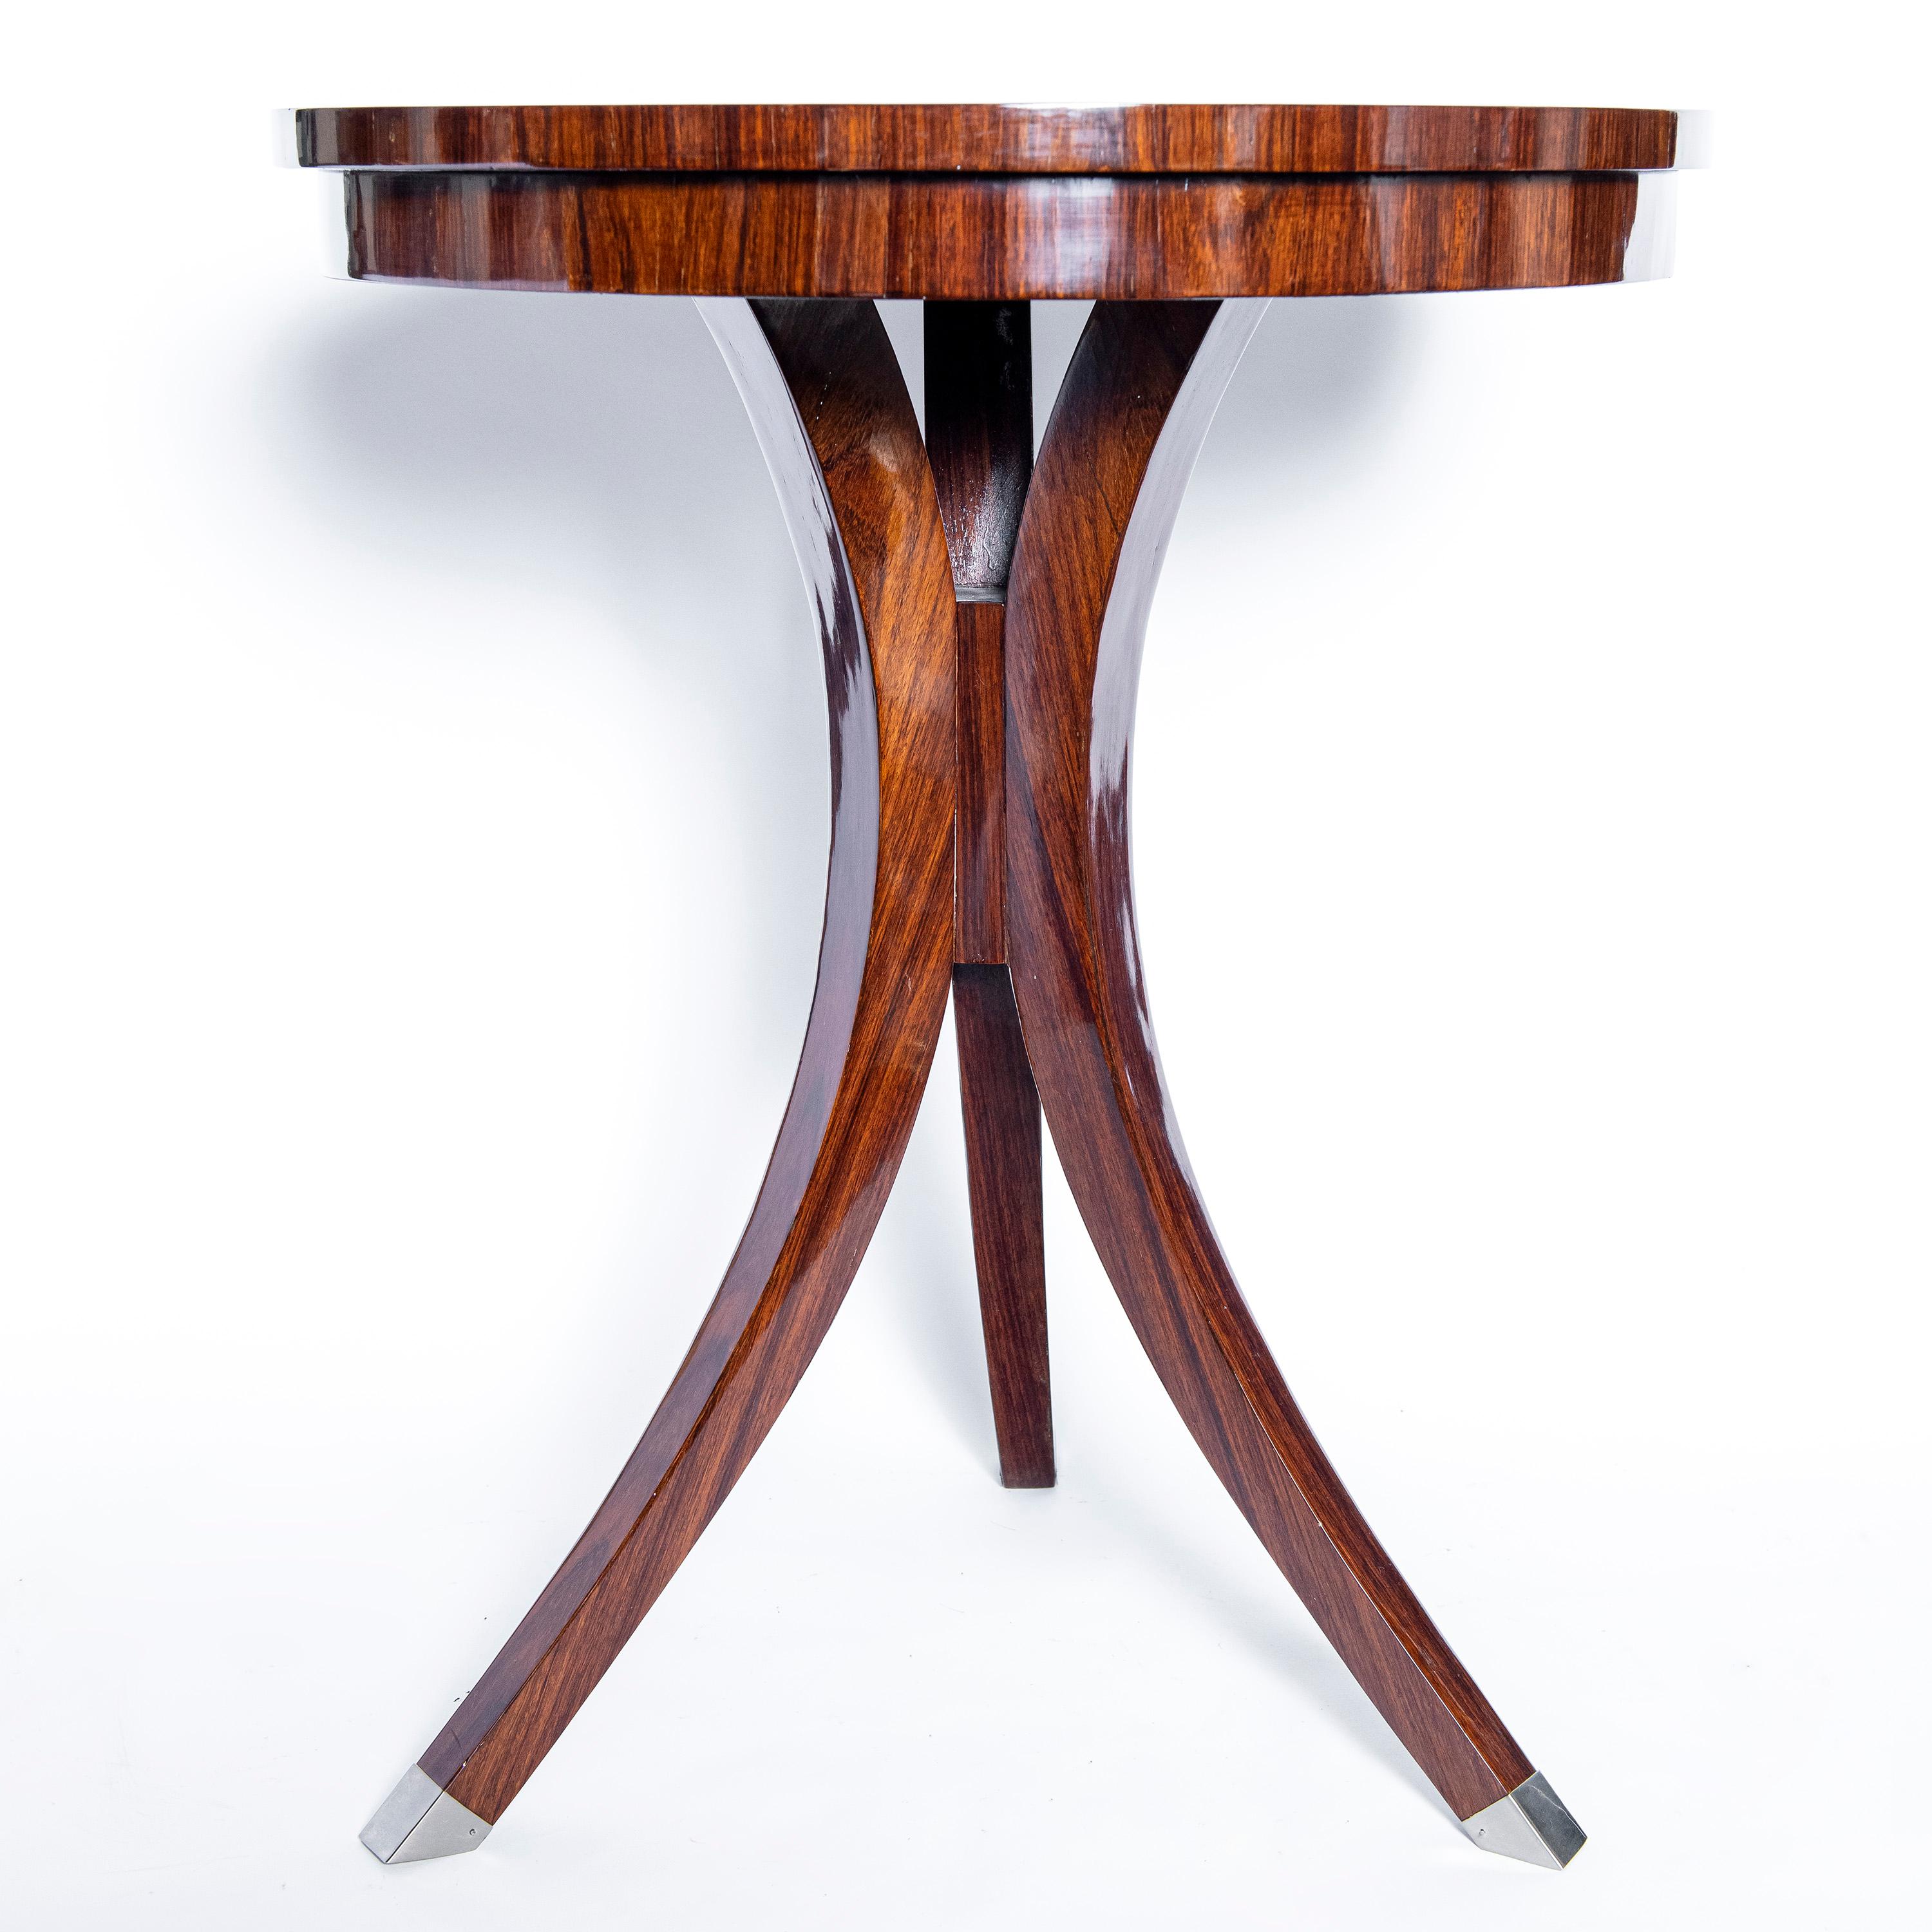 French Pair of Wood Side Tables, Art Deco Period, France, circa 1940